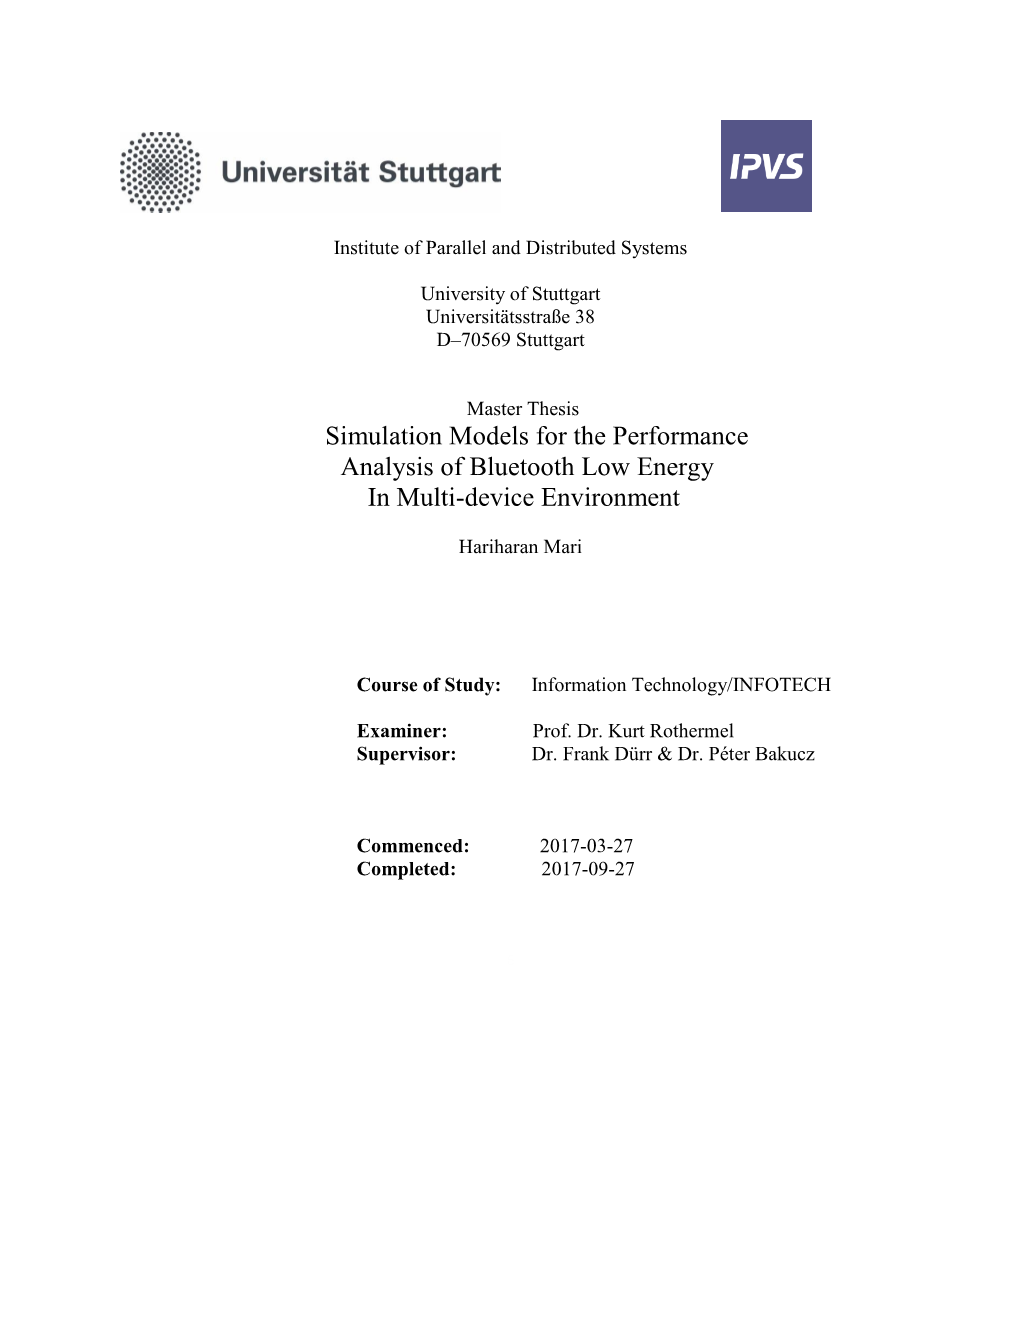 Master Thesis: Institute of Parallel and Distributed Systems